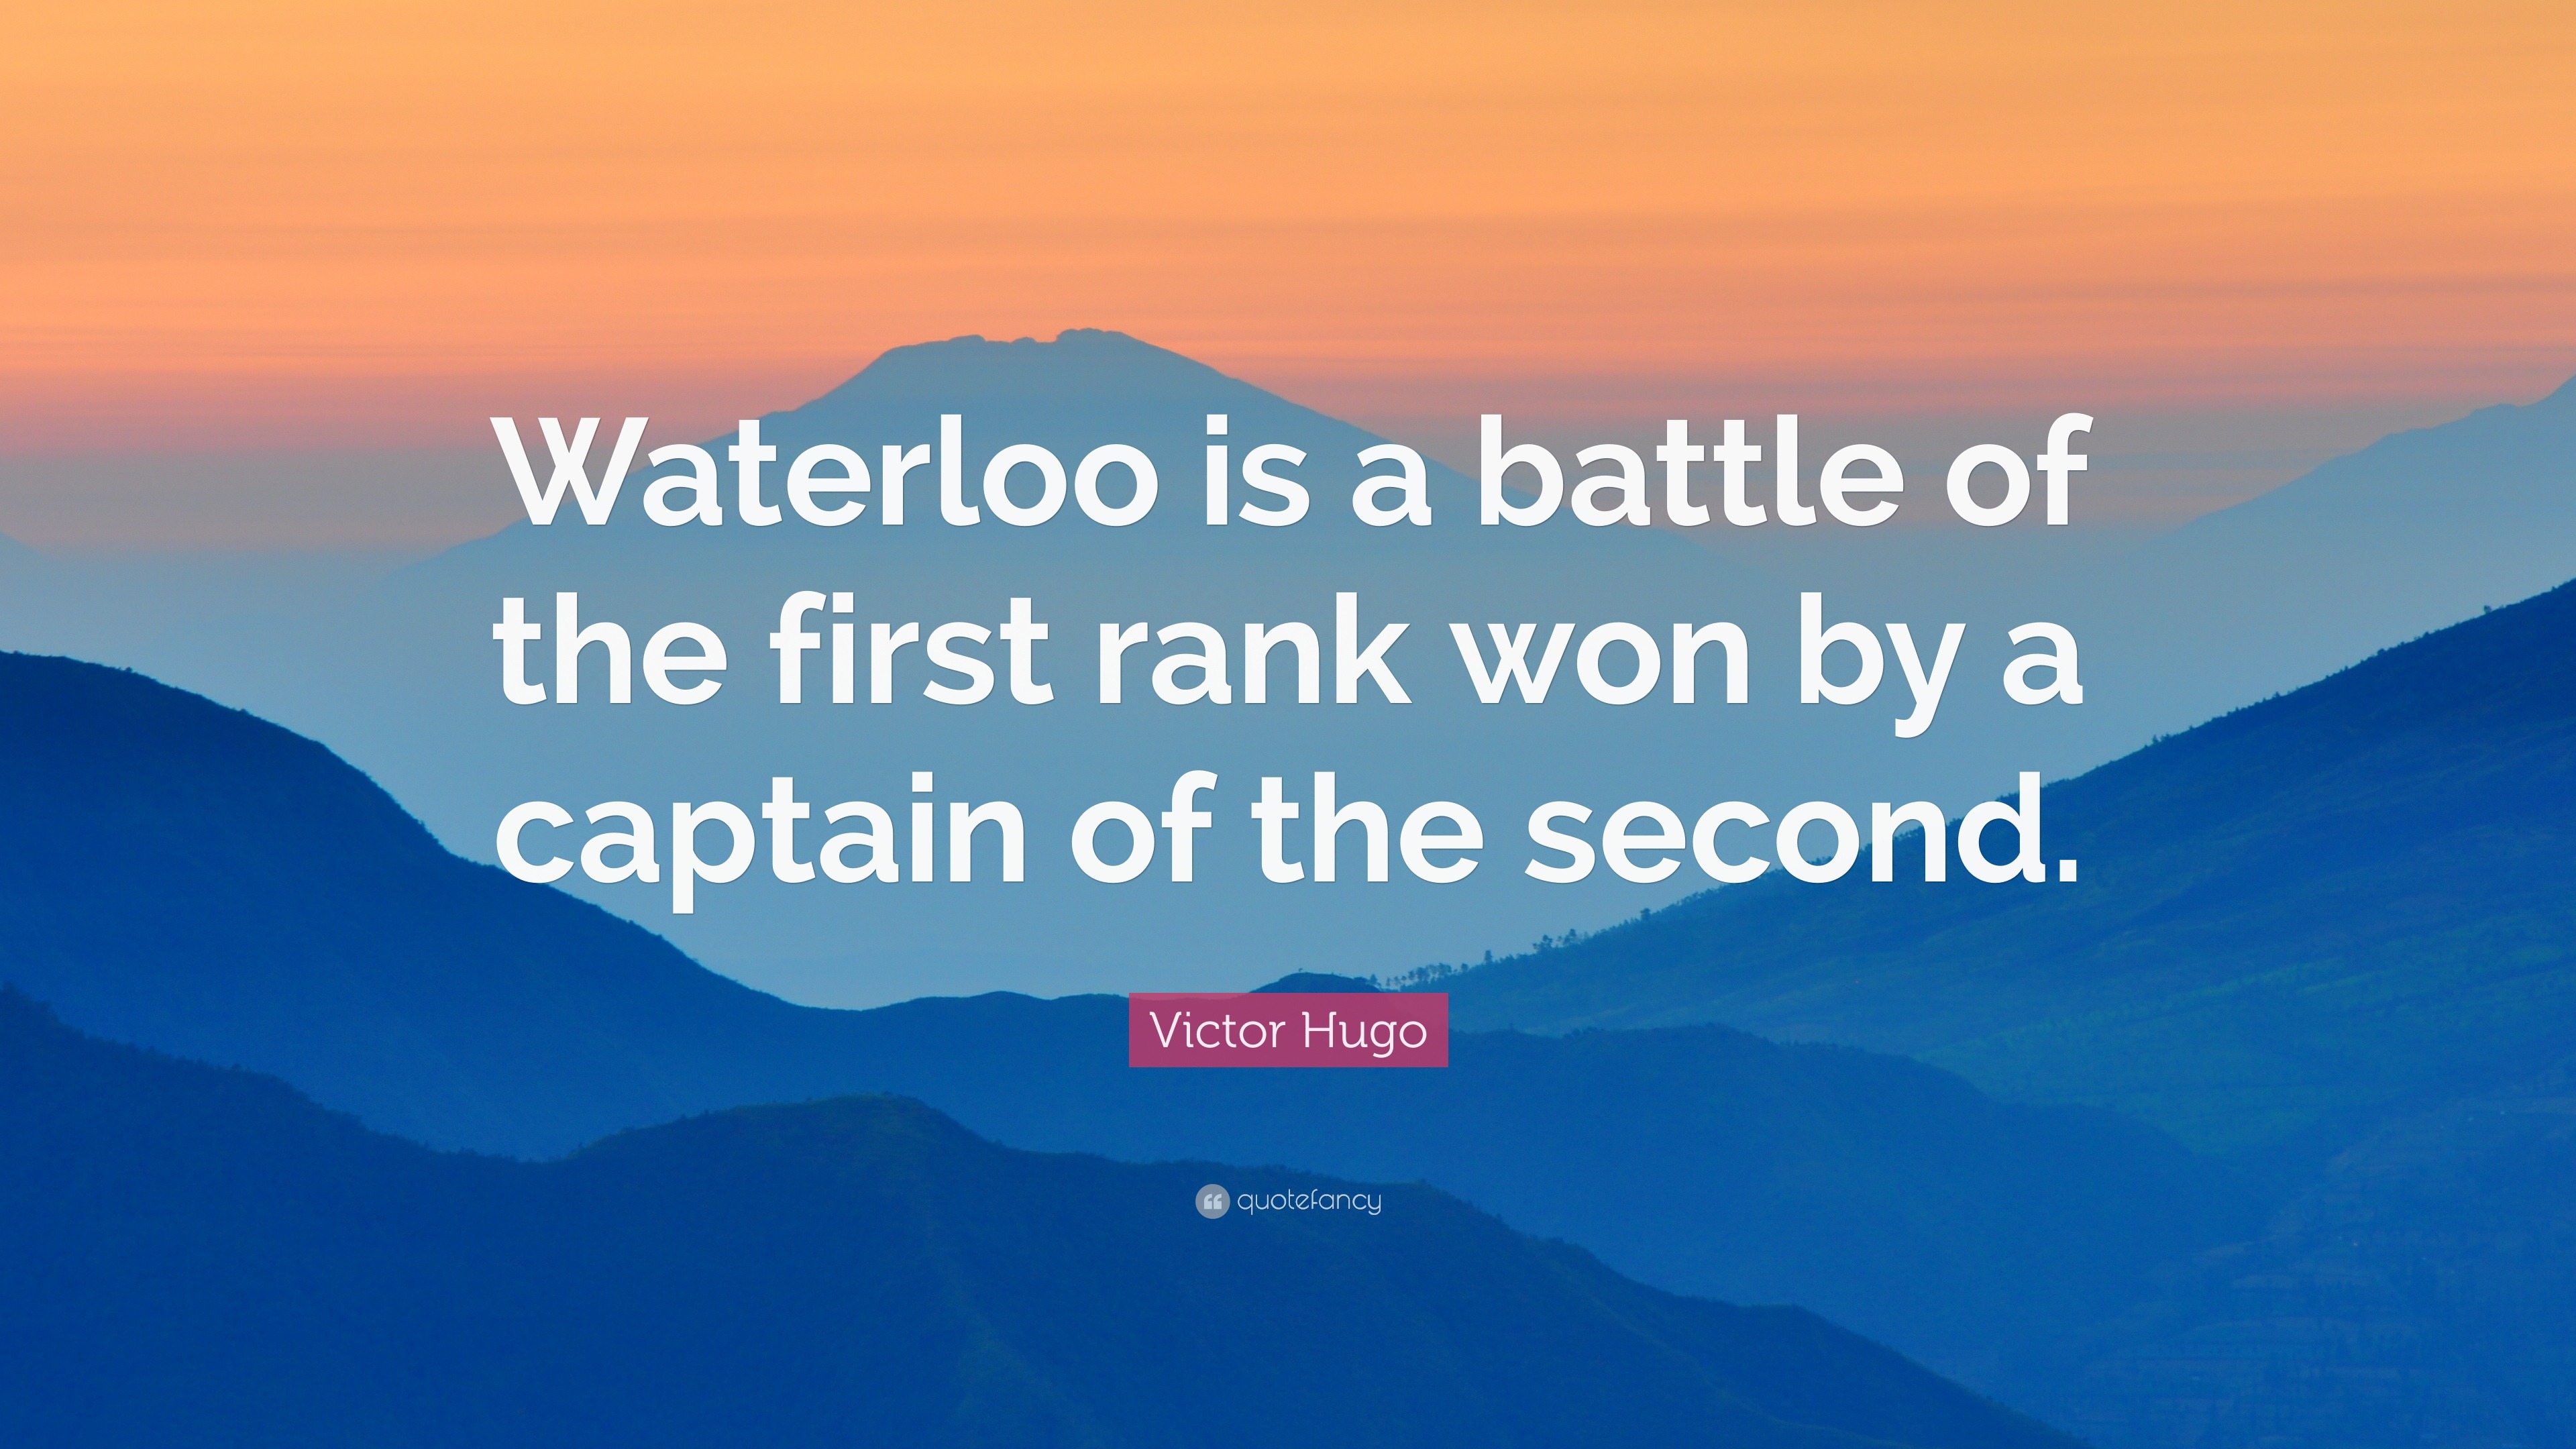 Victor Hugo Quote: “Waterloo is a battle of the first rank won by a